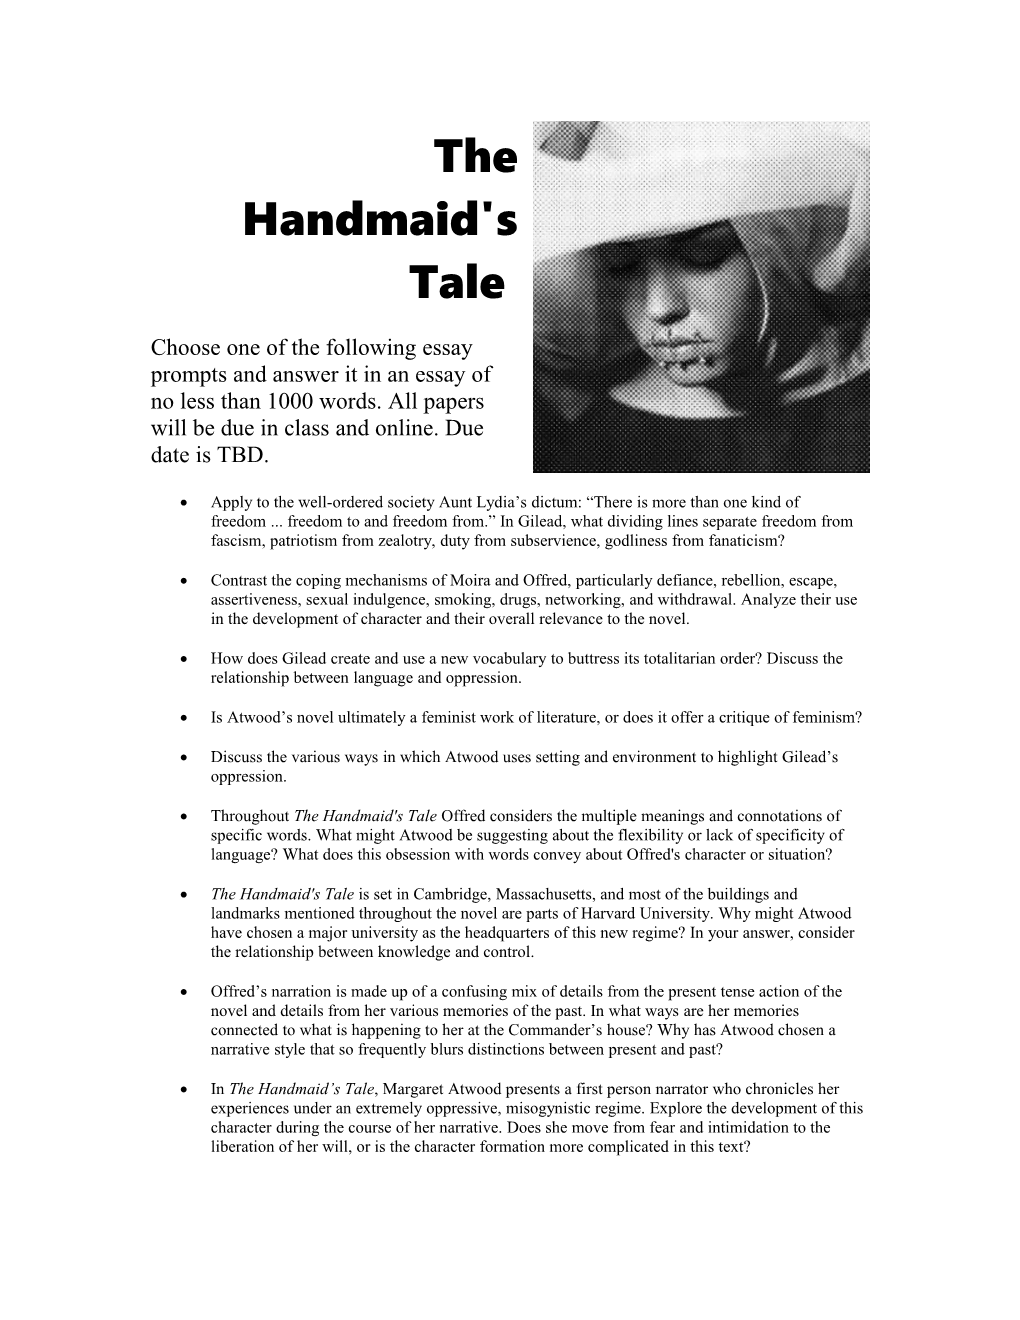 A Handmaid's Tale Essay/Study Questions